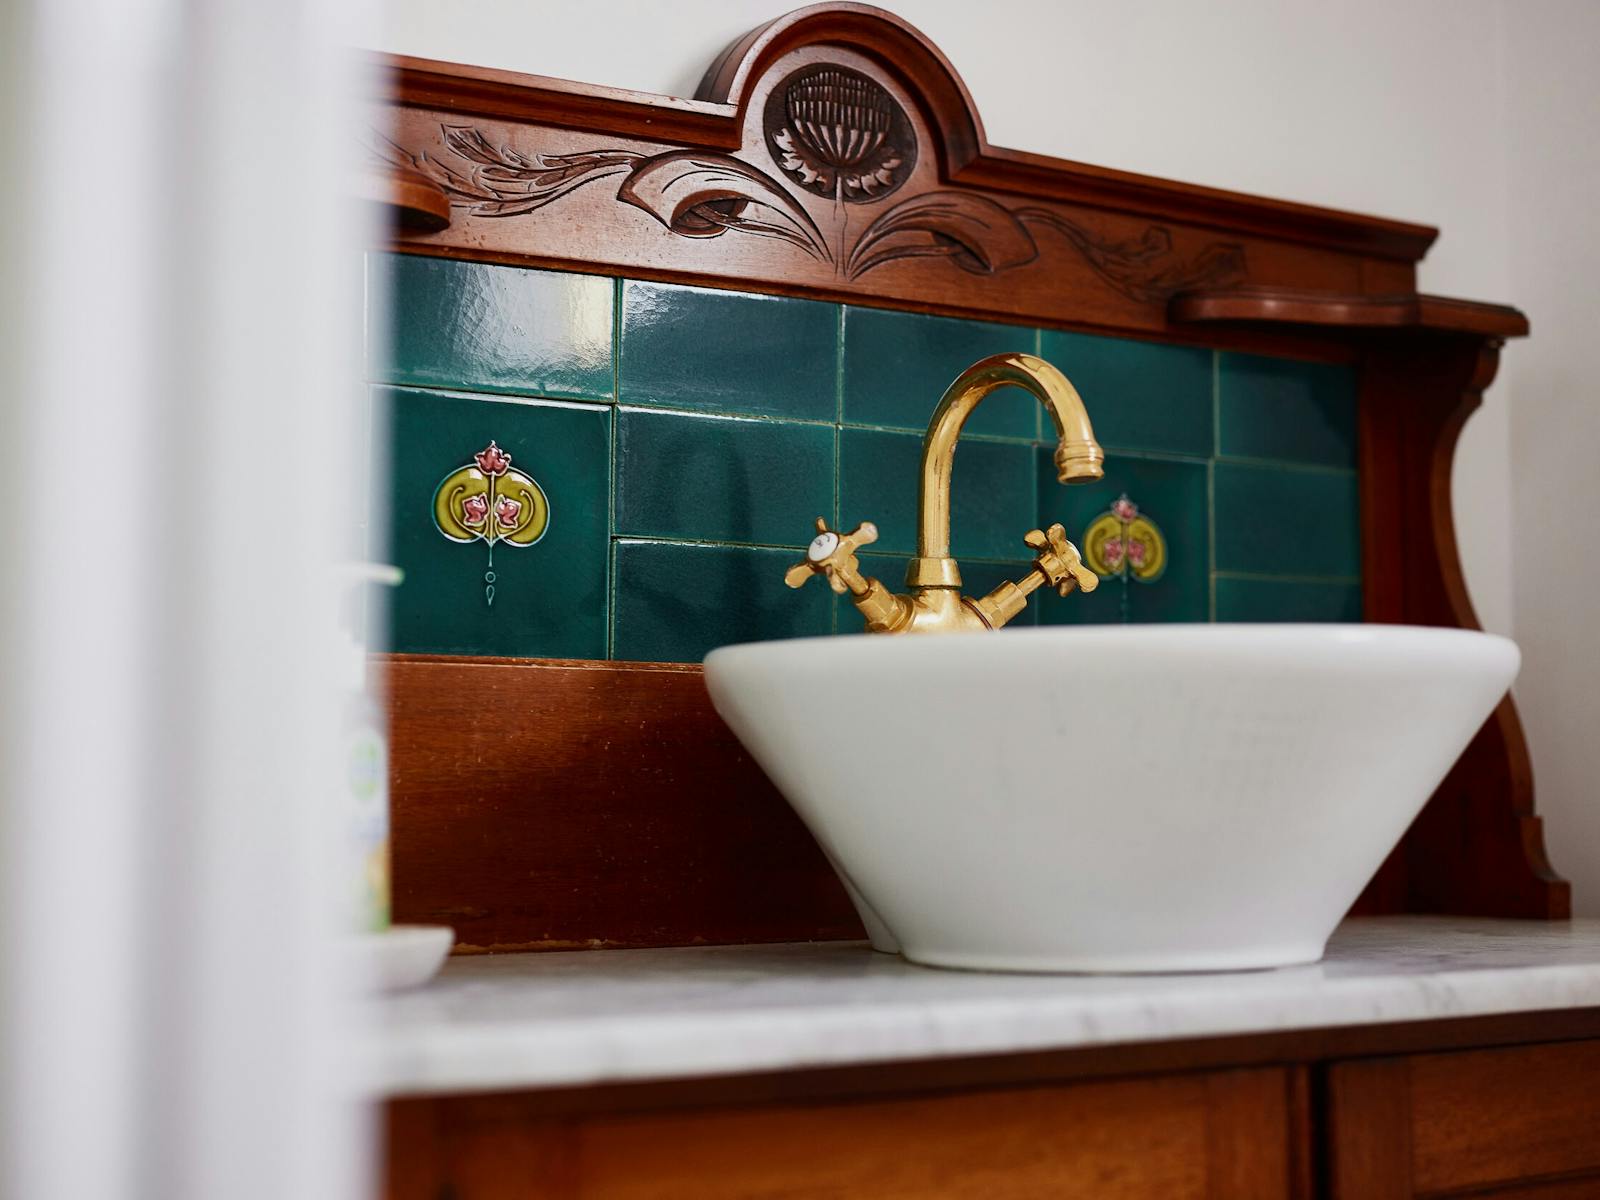 A basin sits on a darn, wooden vanity with deep green tiles. The tap ware is shiny and gold.